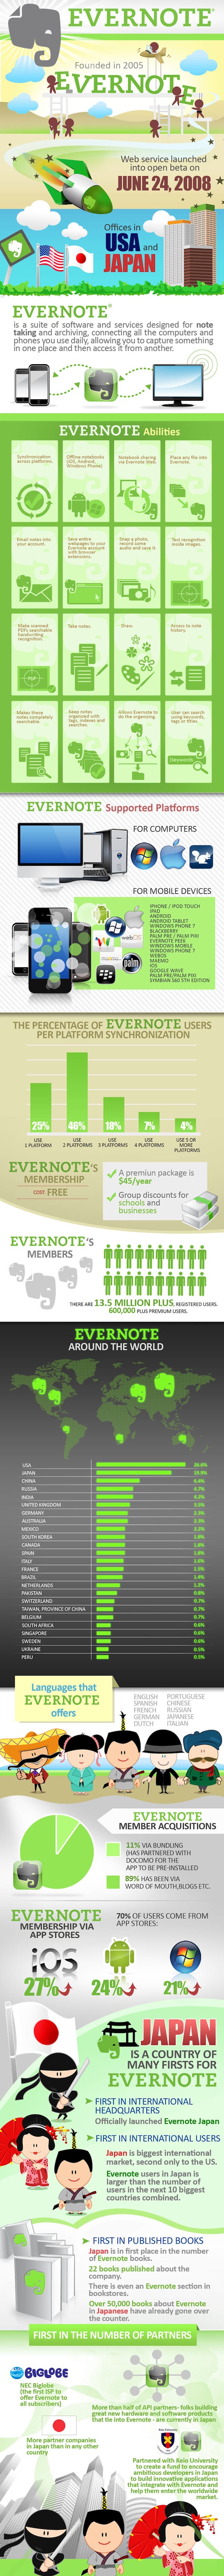 Evernote infographic